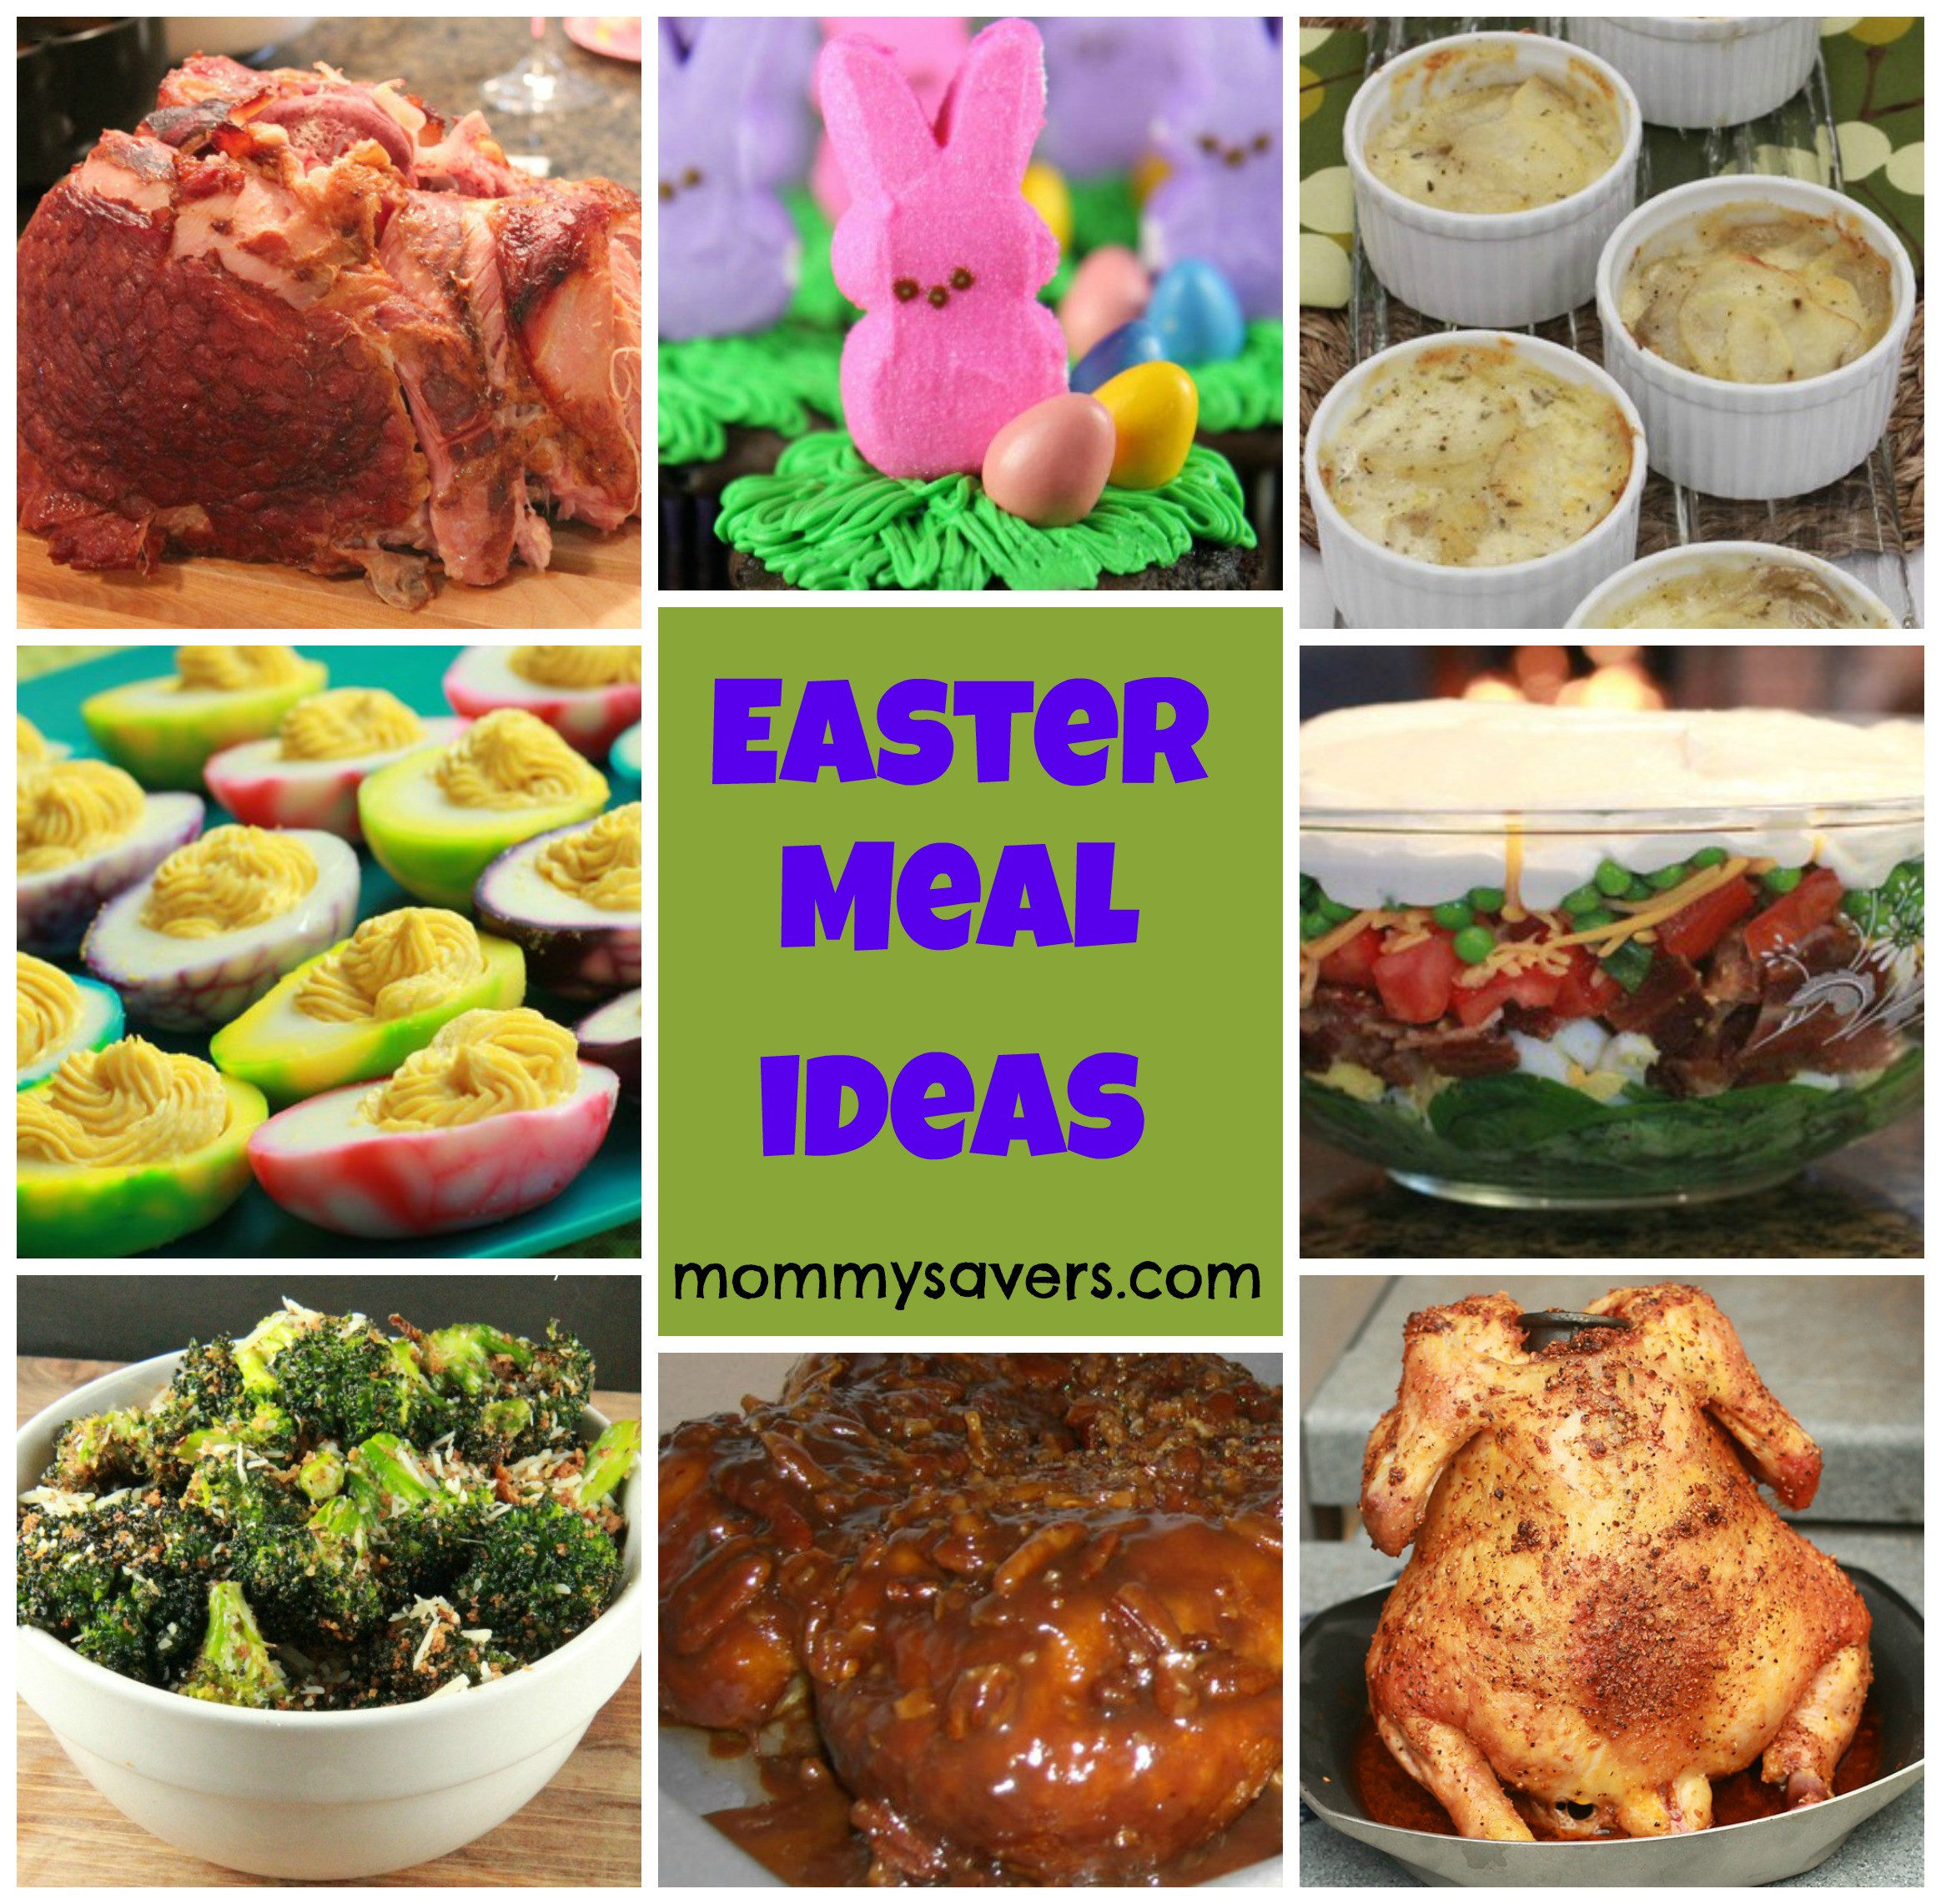 Easter Lunch Ideas
 Easter Meal Ideas Mommysavers